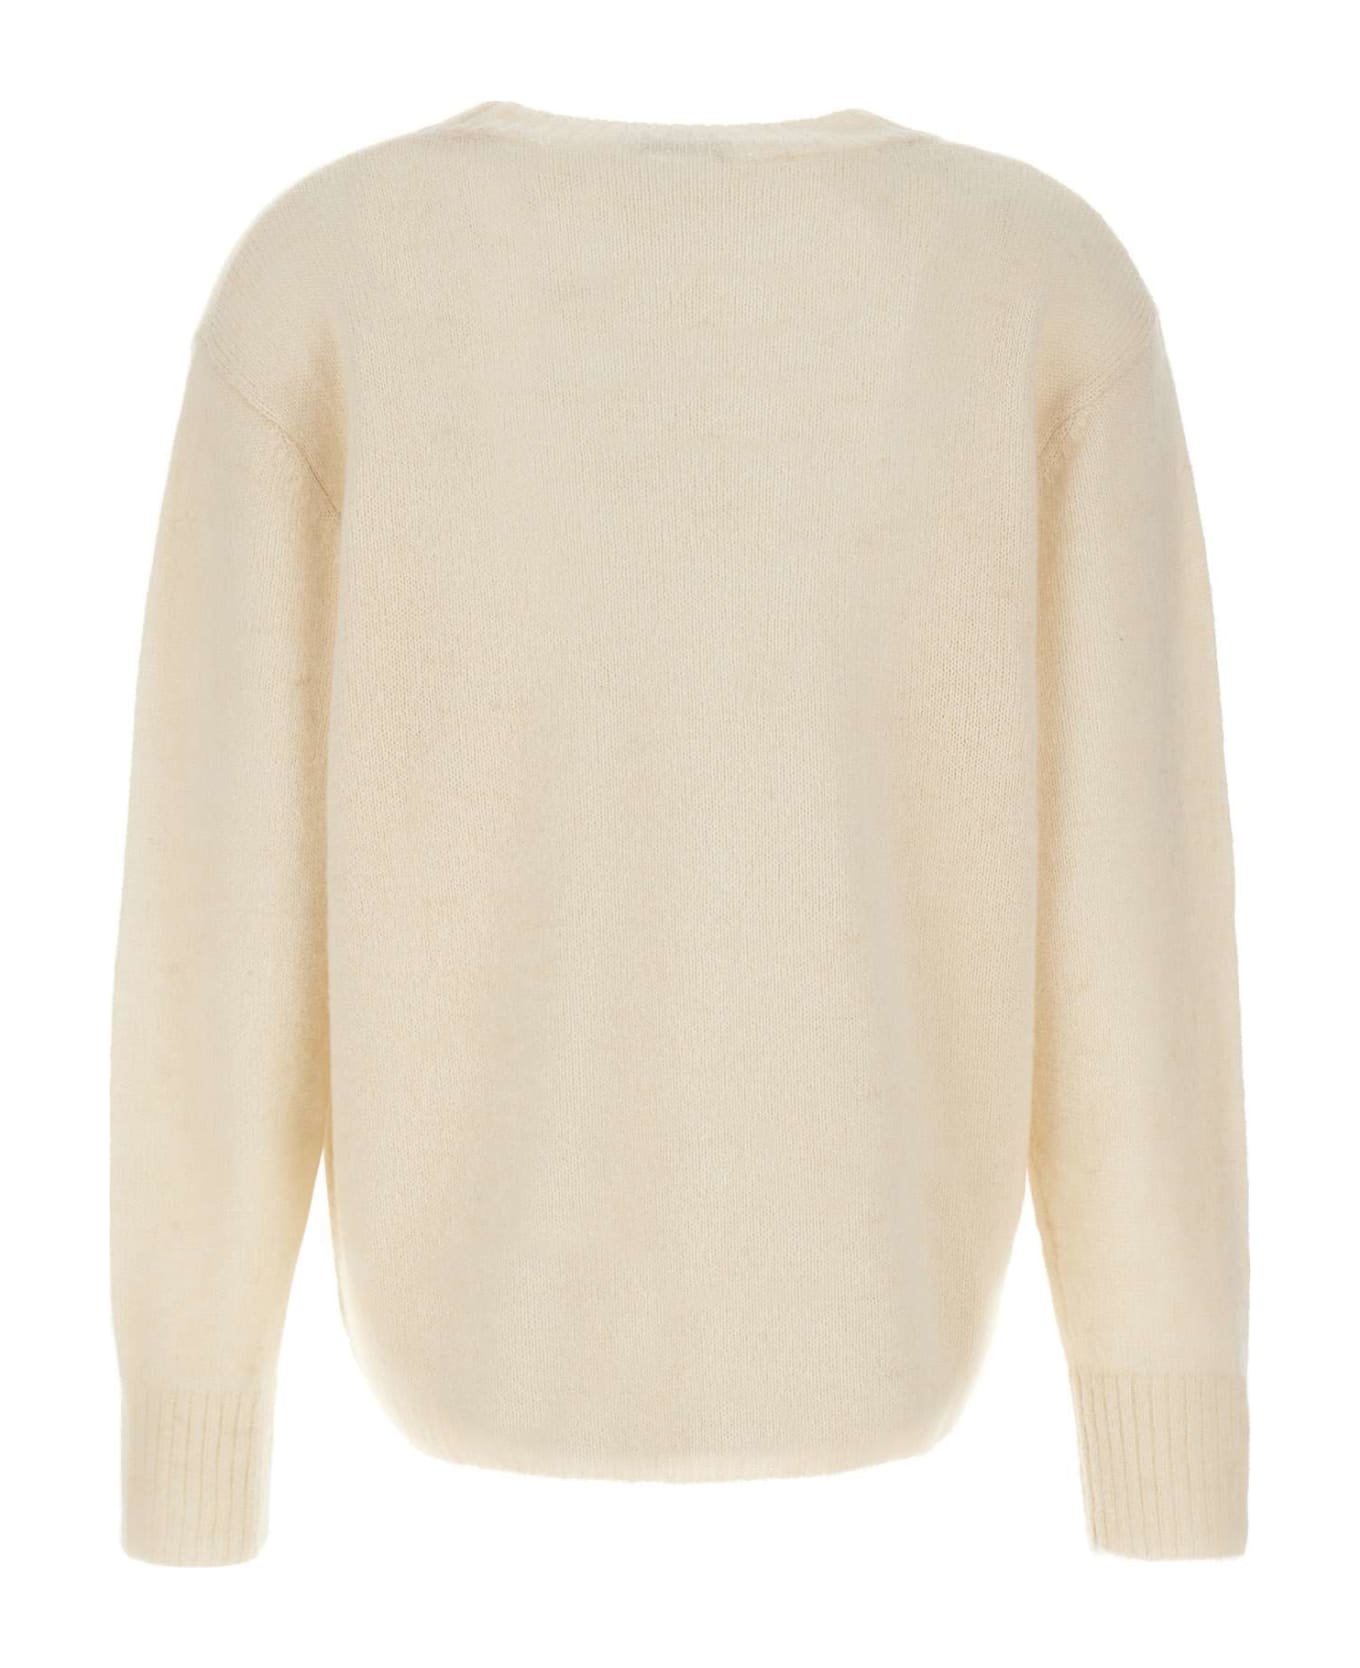 A.P.C. Alison Knit Sweater - OFF WHITE